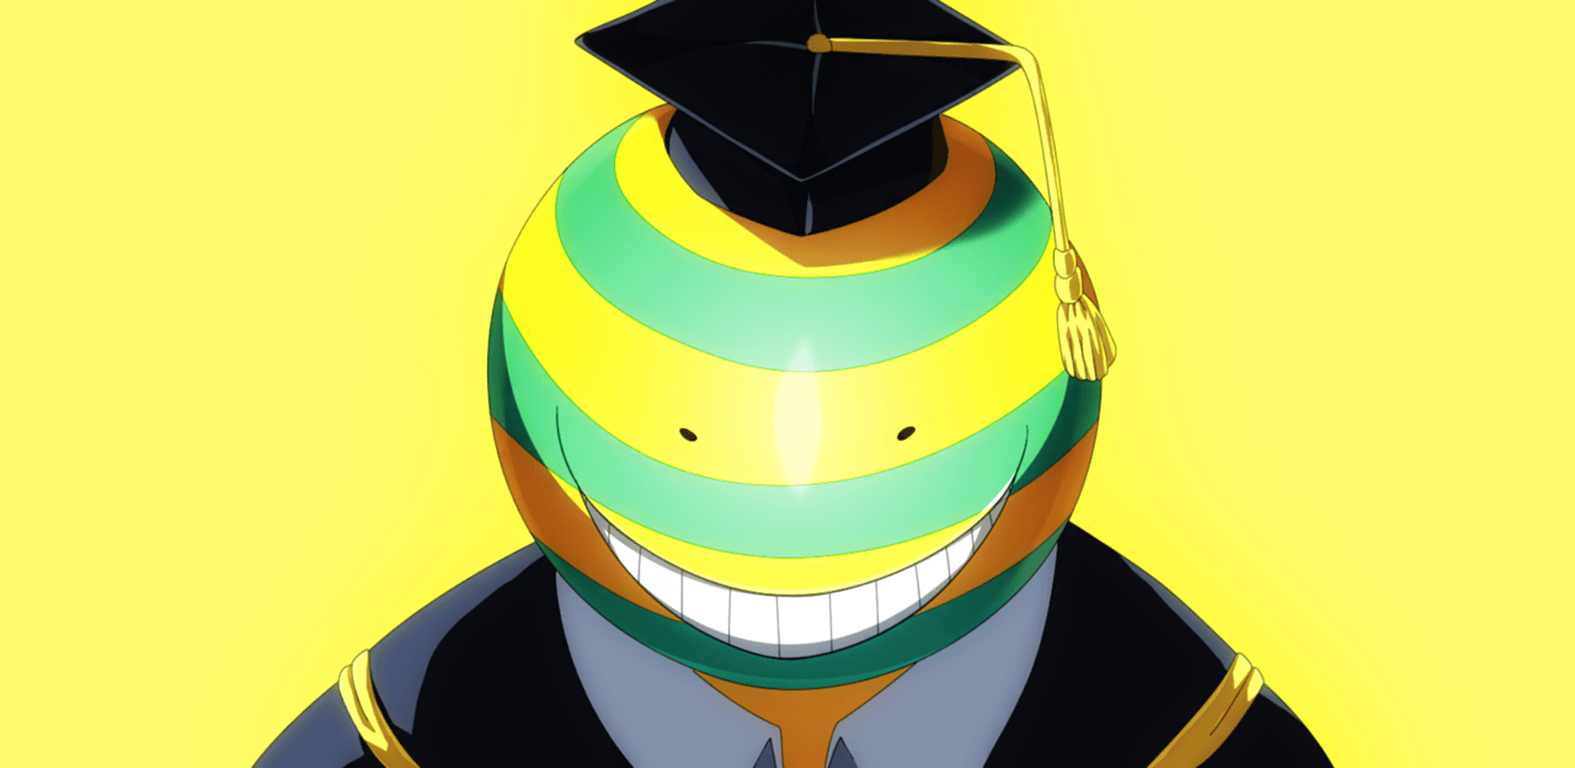 Assassination Classroom Sub Gallery By: drak95